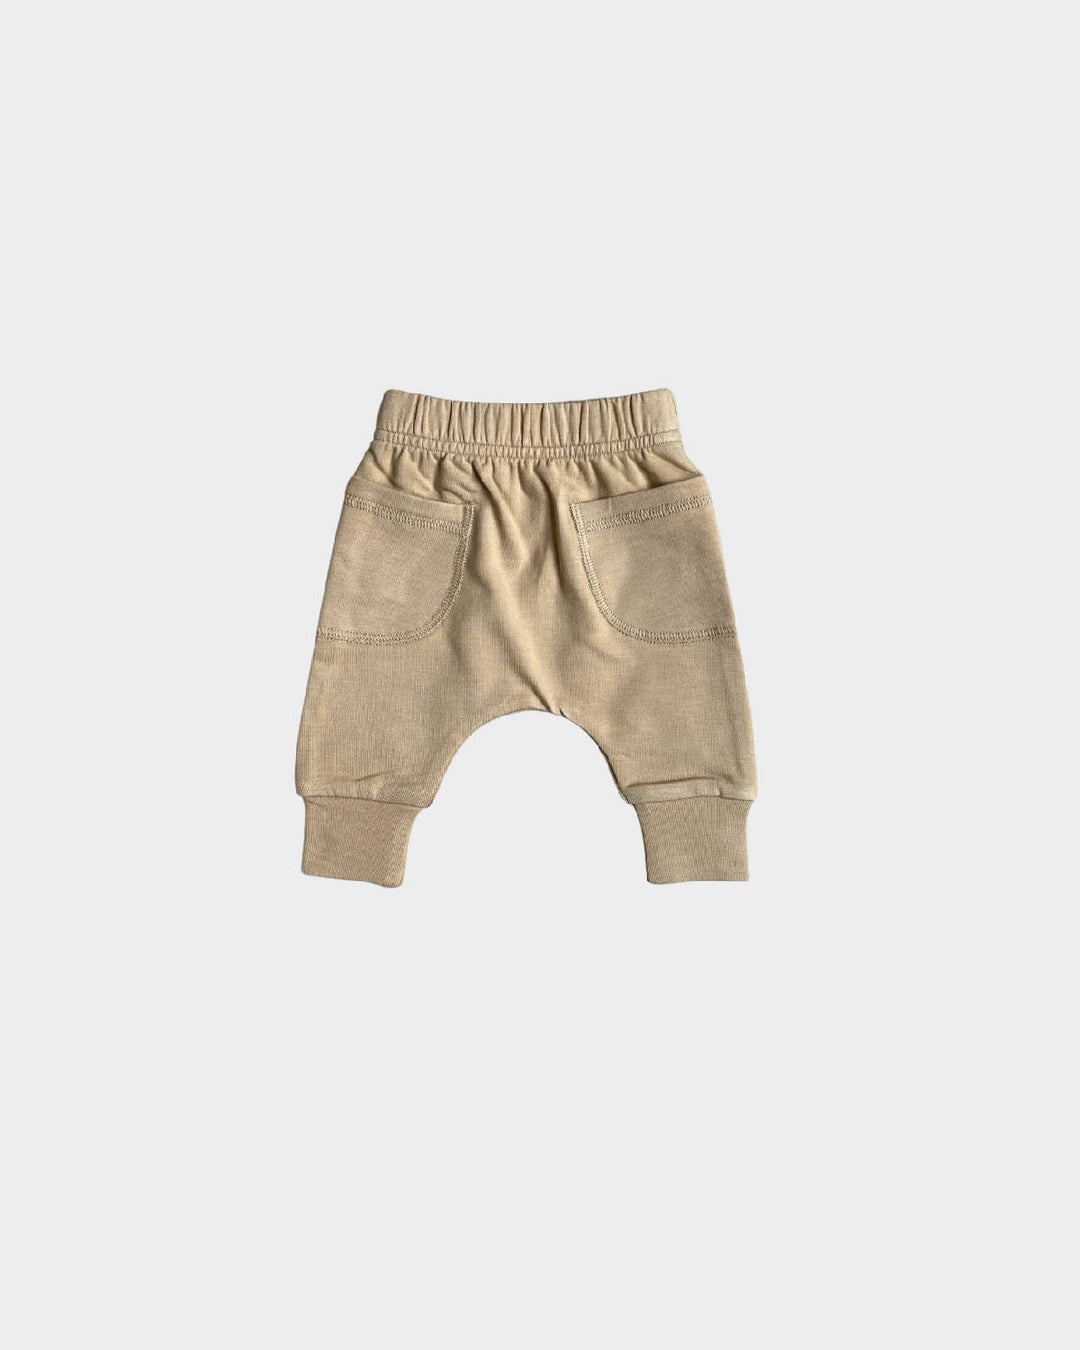 Baby Pocket Pants in Wheat